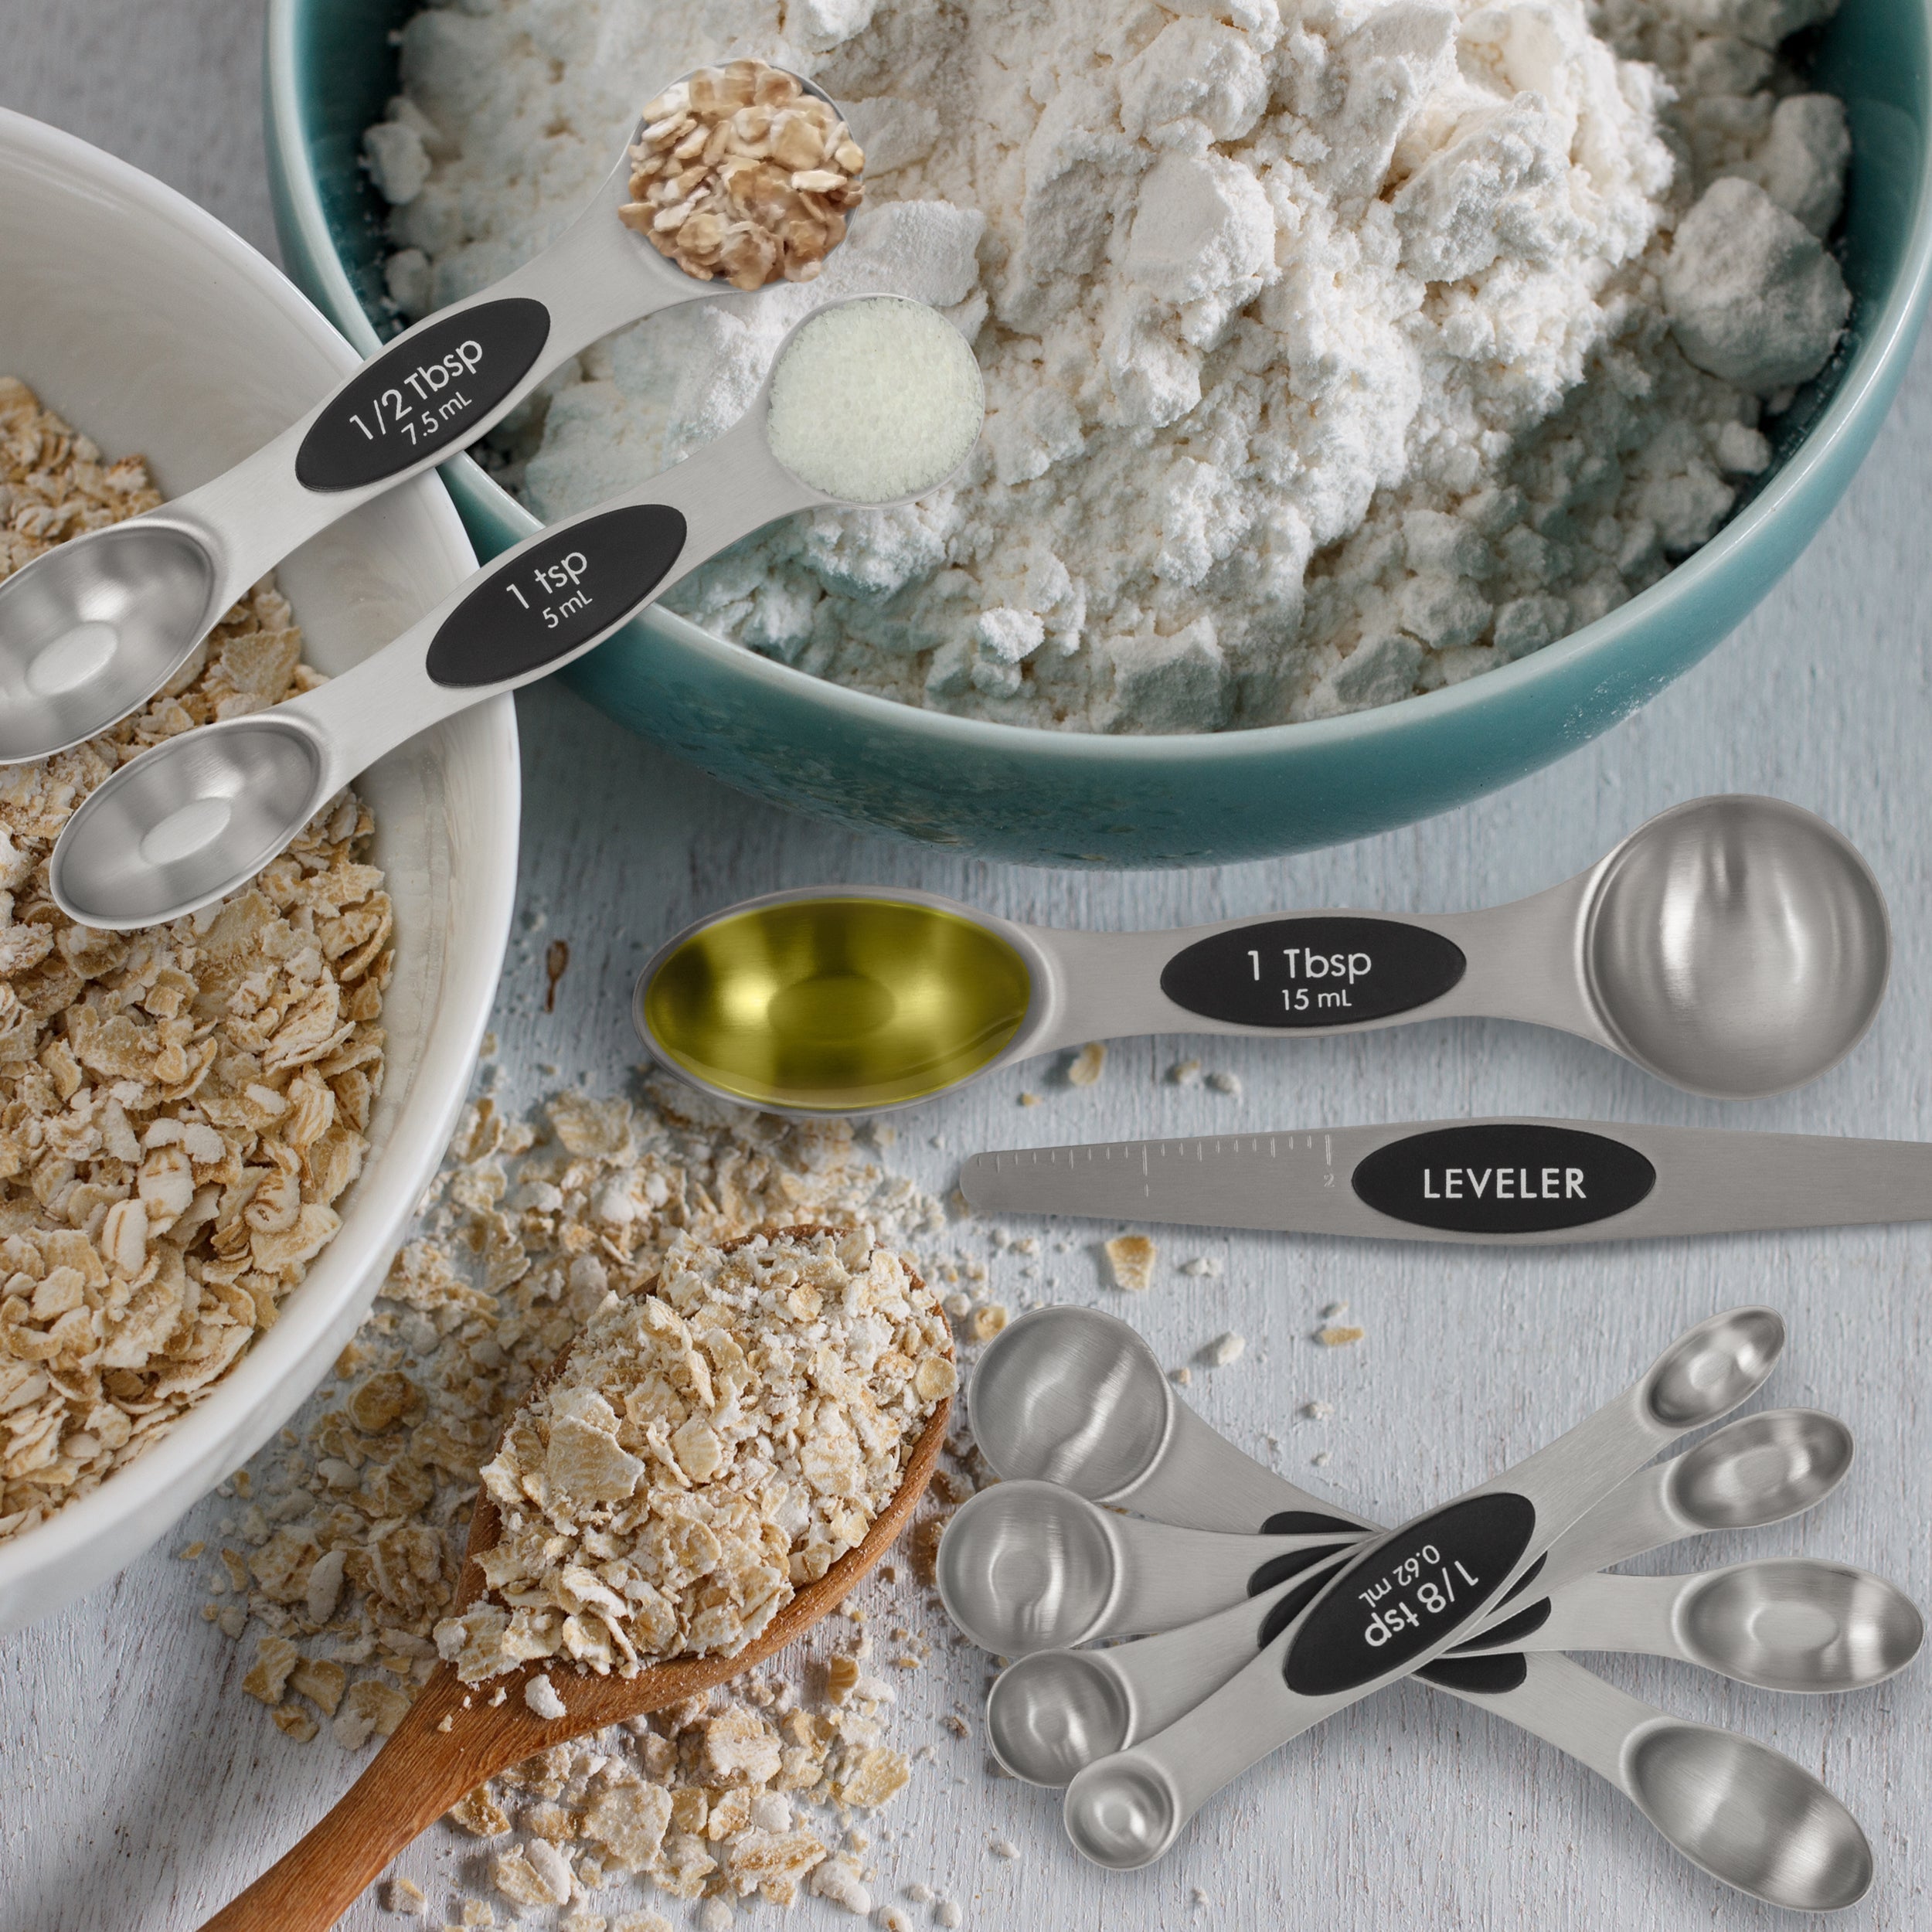 https://www.zulaykitchen.com/cdn/shop/products/magnetic-measuring-spoons-with-levelermagnetic-measuring-spoons-with-levelerzulay-kitchen-clearwaterzulay-kitchenz-mgntc-2side-msrng-spn-807781.jpg?v=1684848514